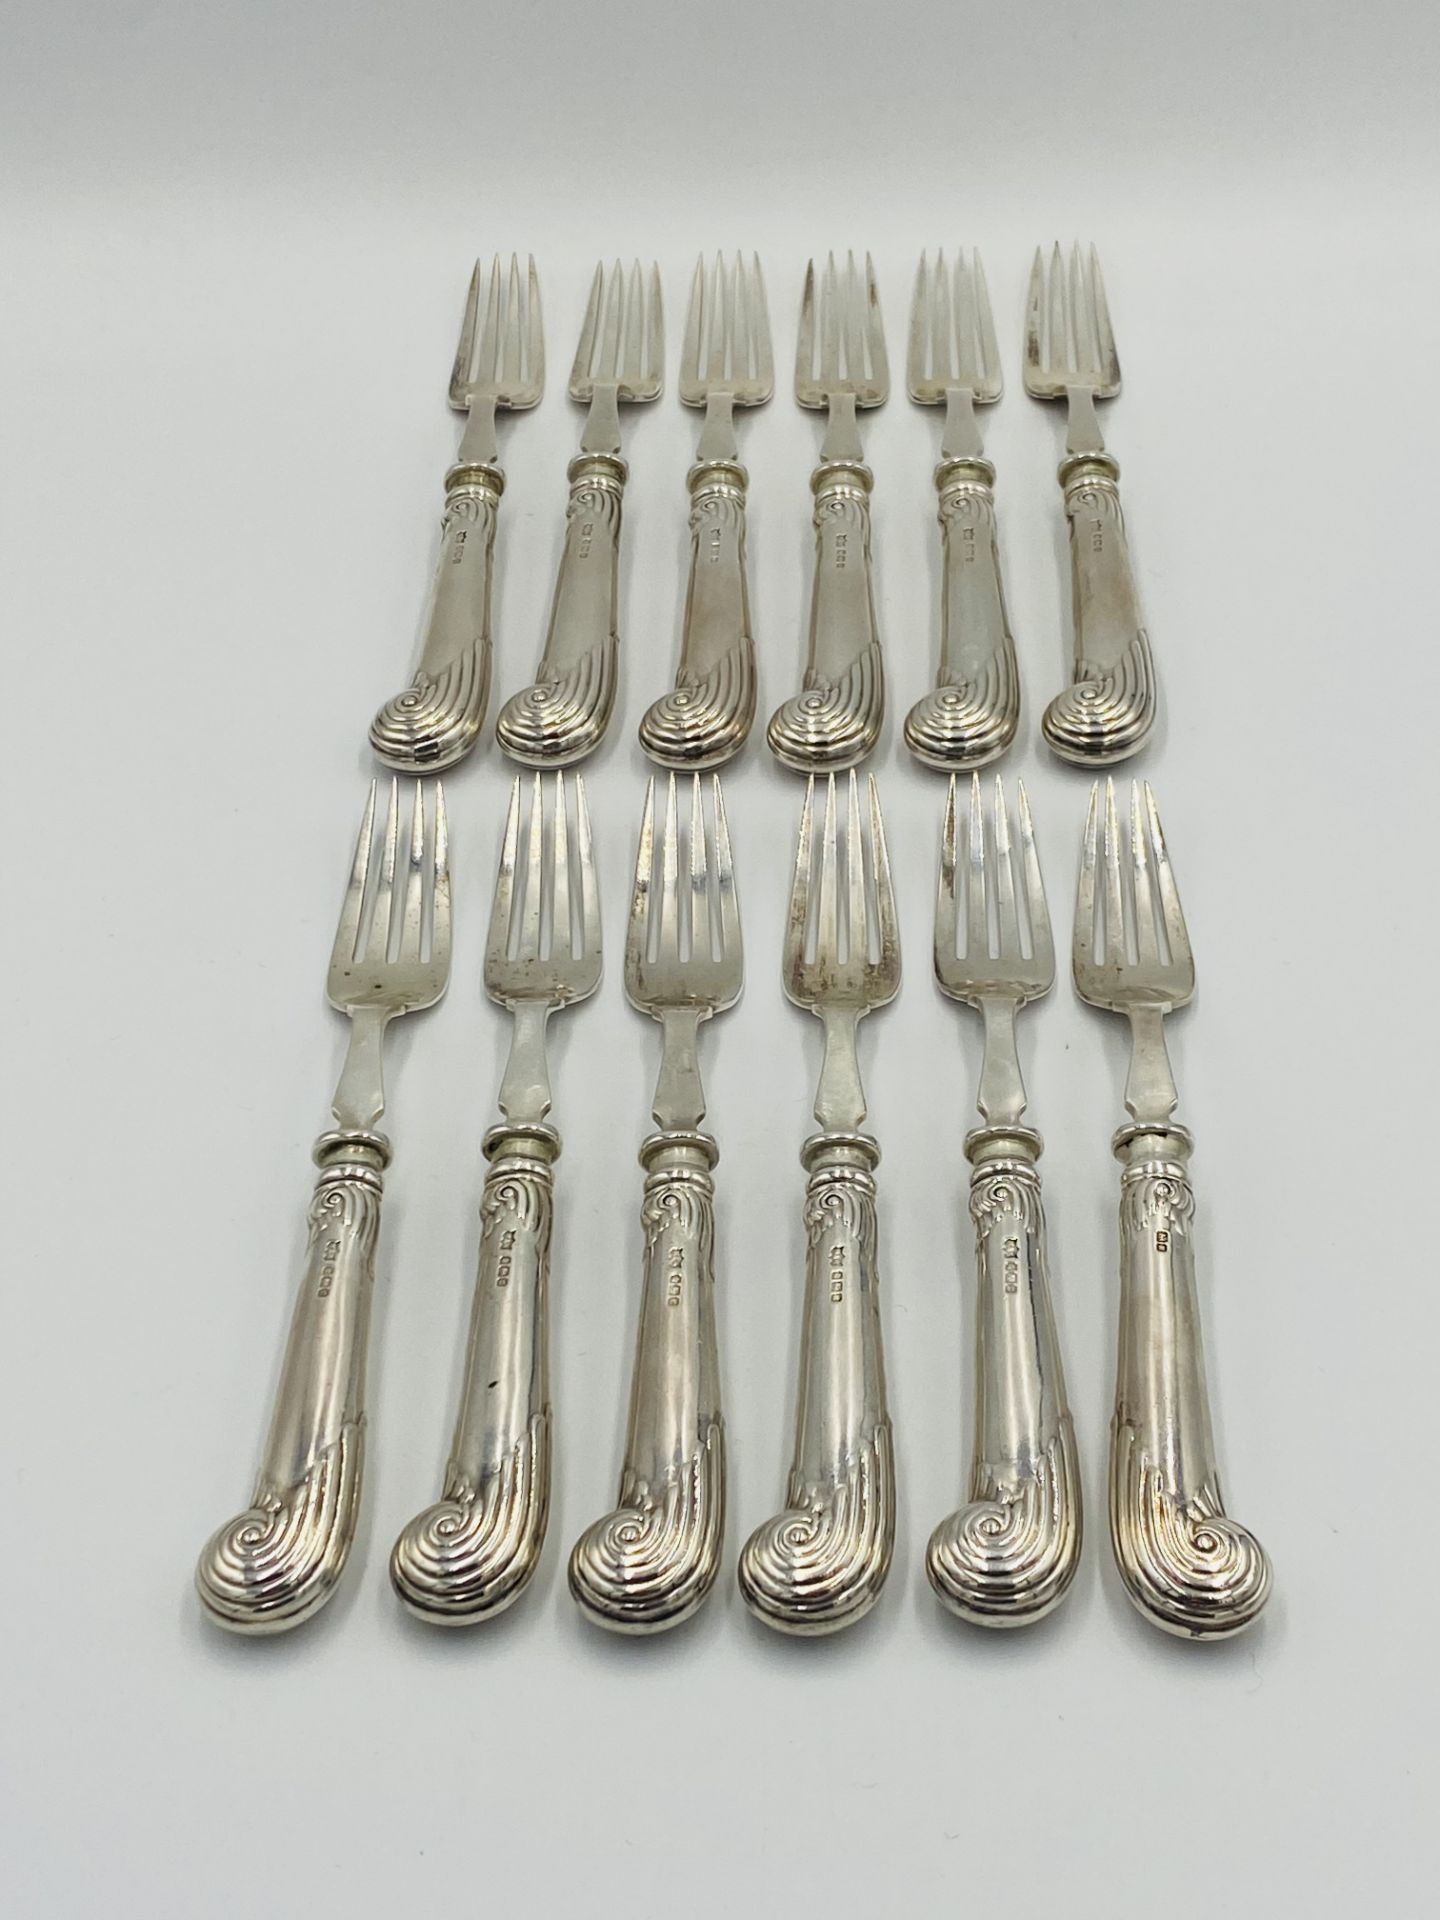 Twelve place set of silver pistol grip fish knives and forks, London 1905 - Image 3 of 11